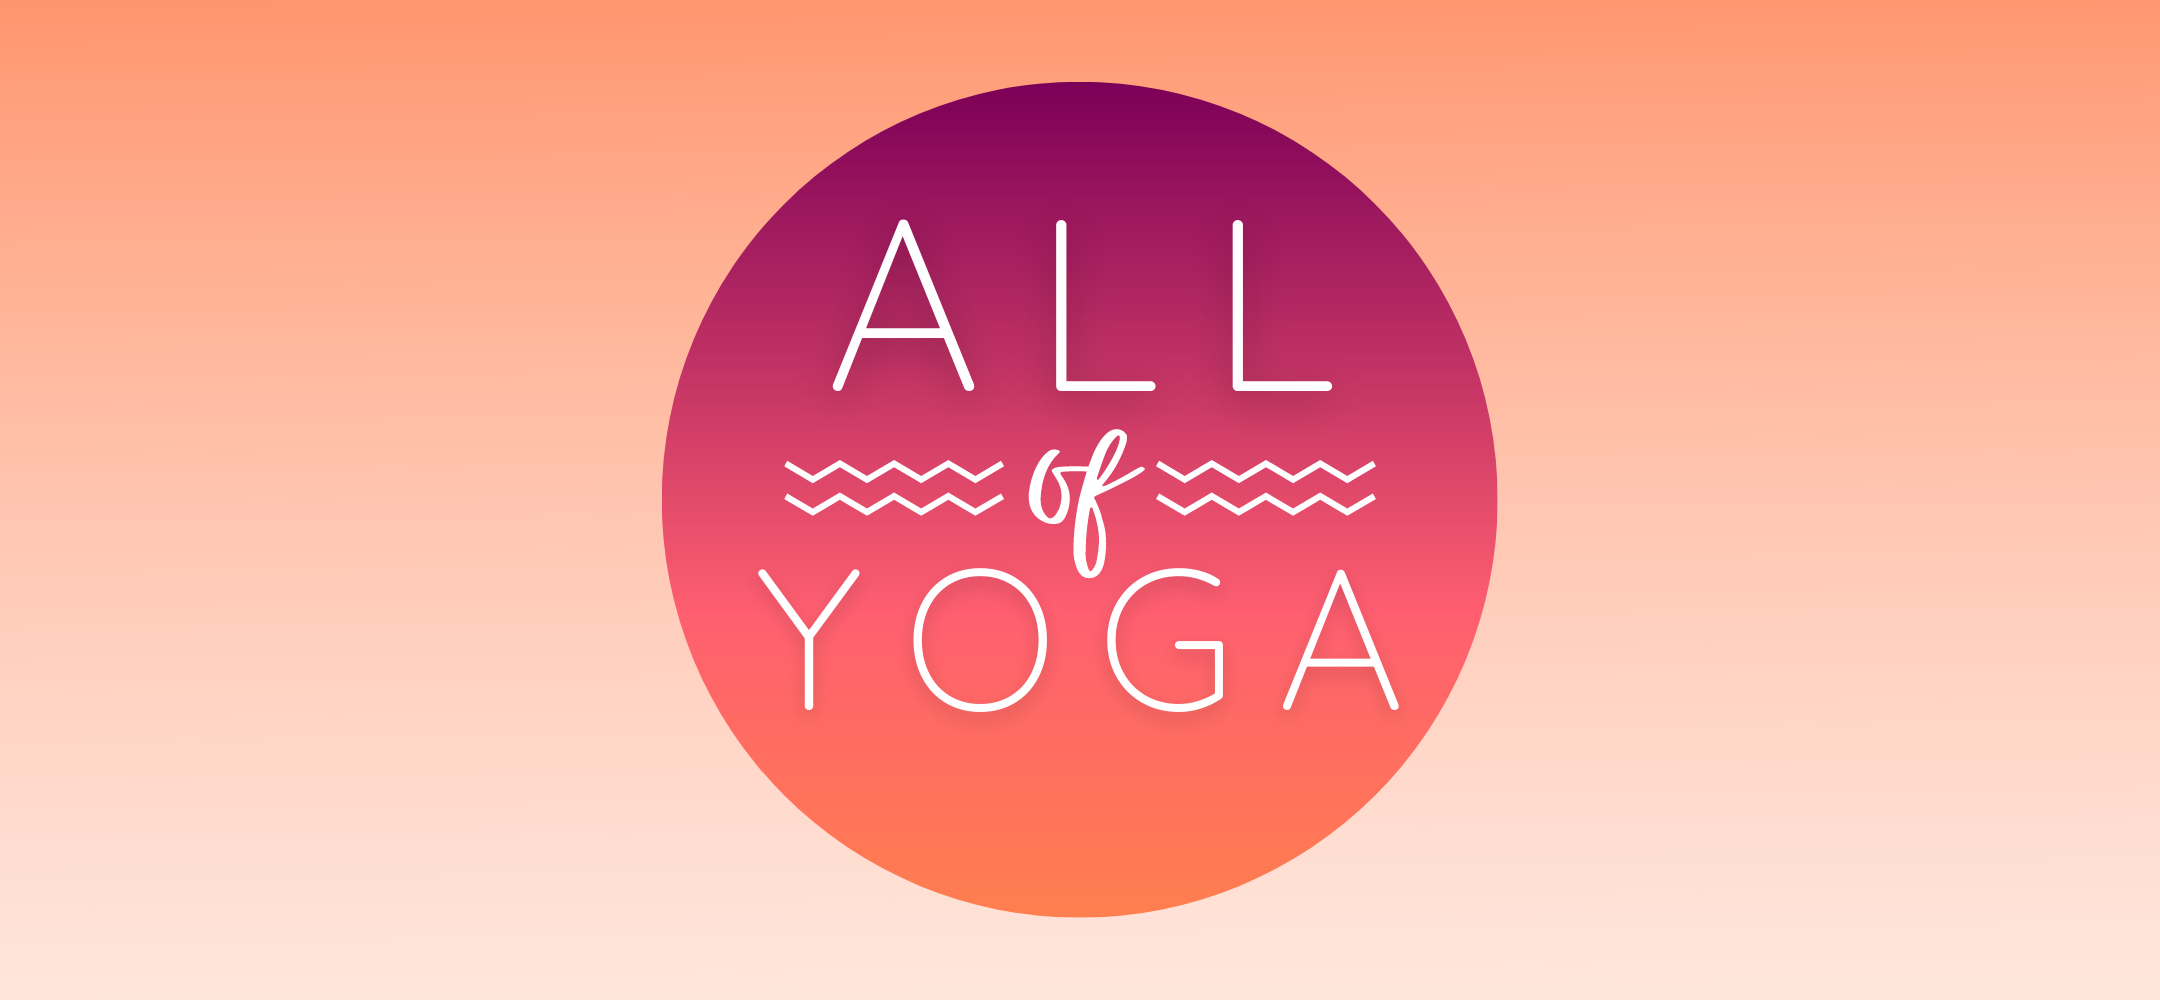 All of yoga podcast